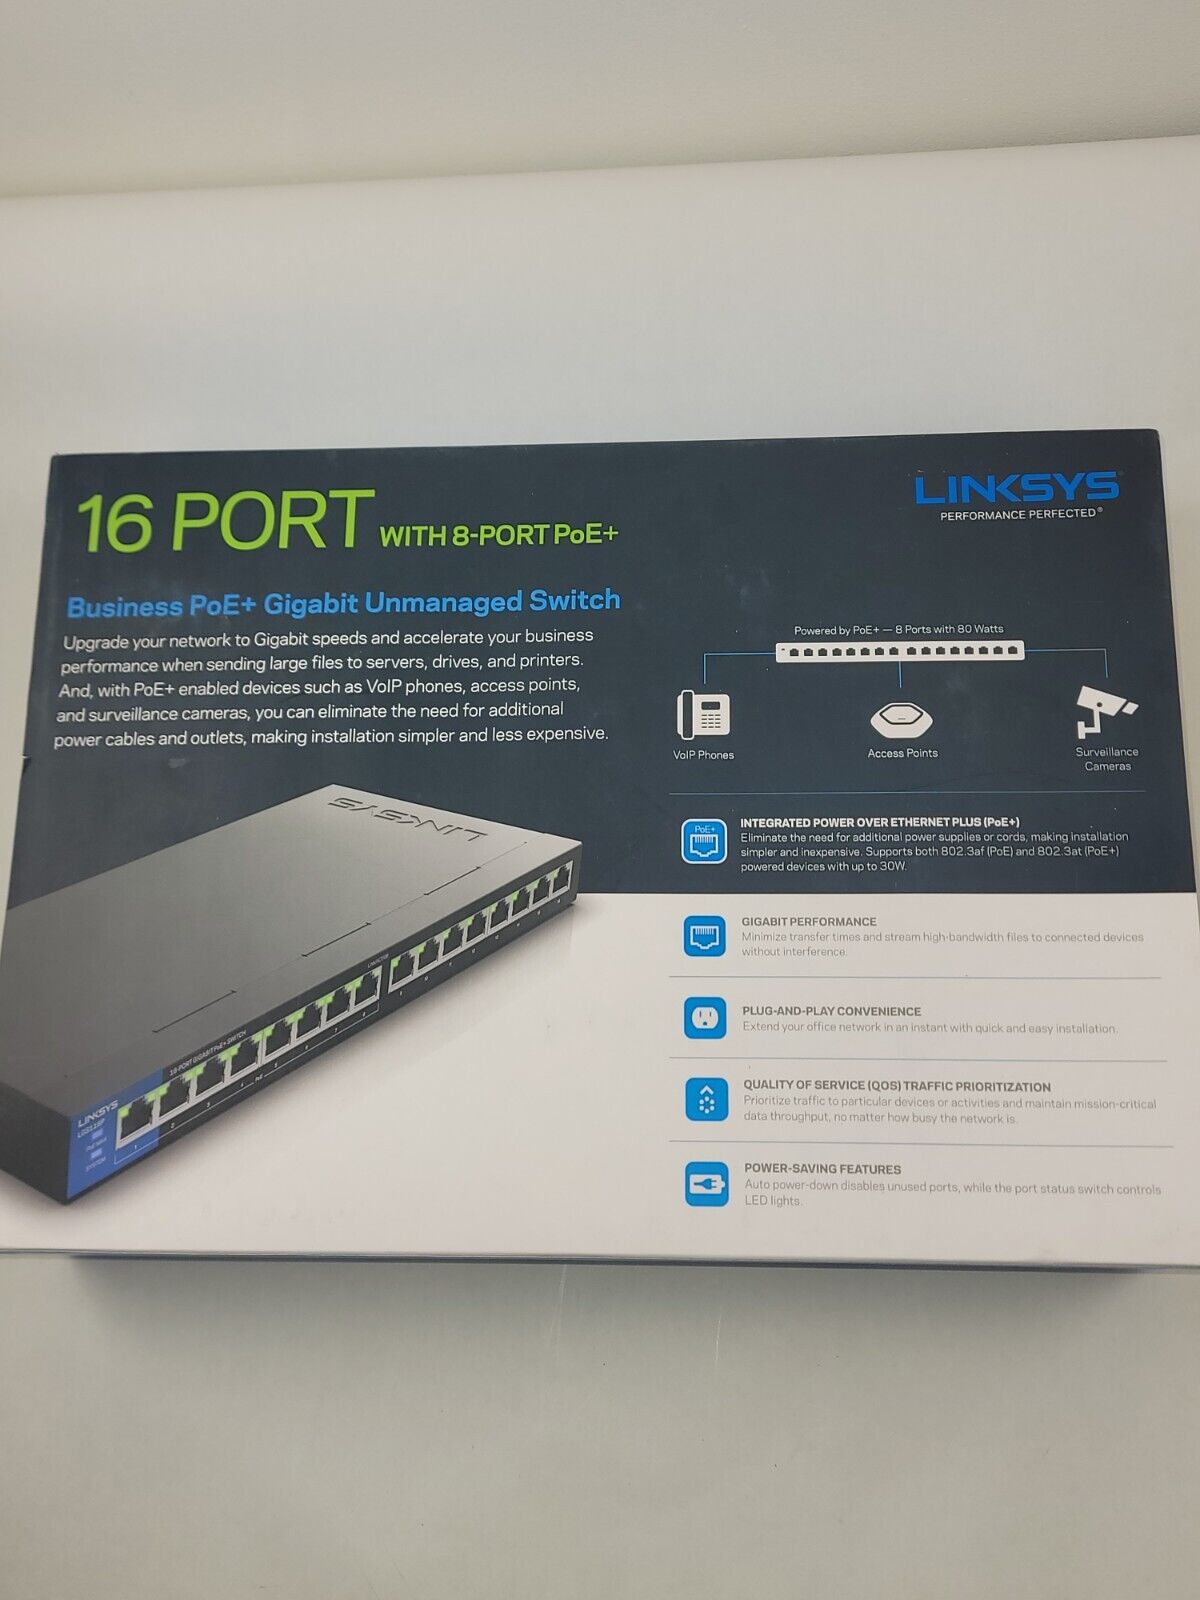 Linksys LGS116P 16-Port With 8-port PoE+ Business Gigabit Unmanage Switch